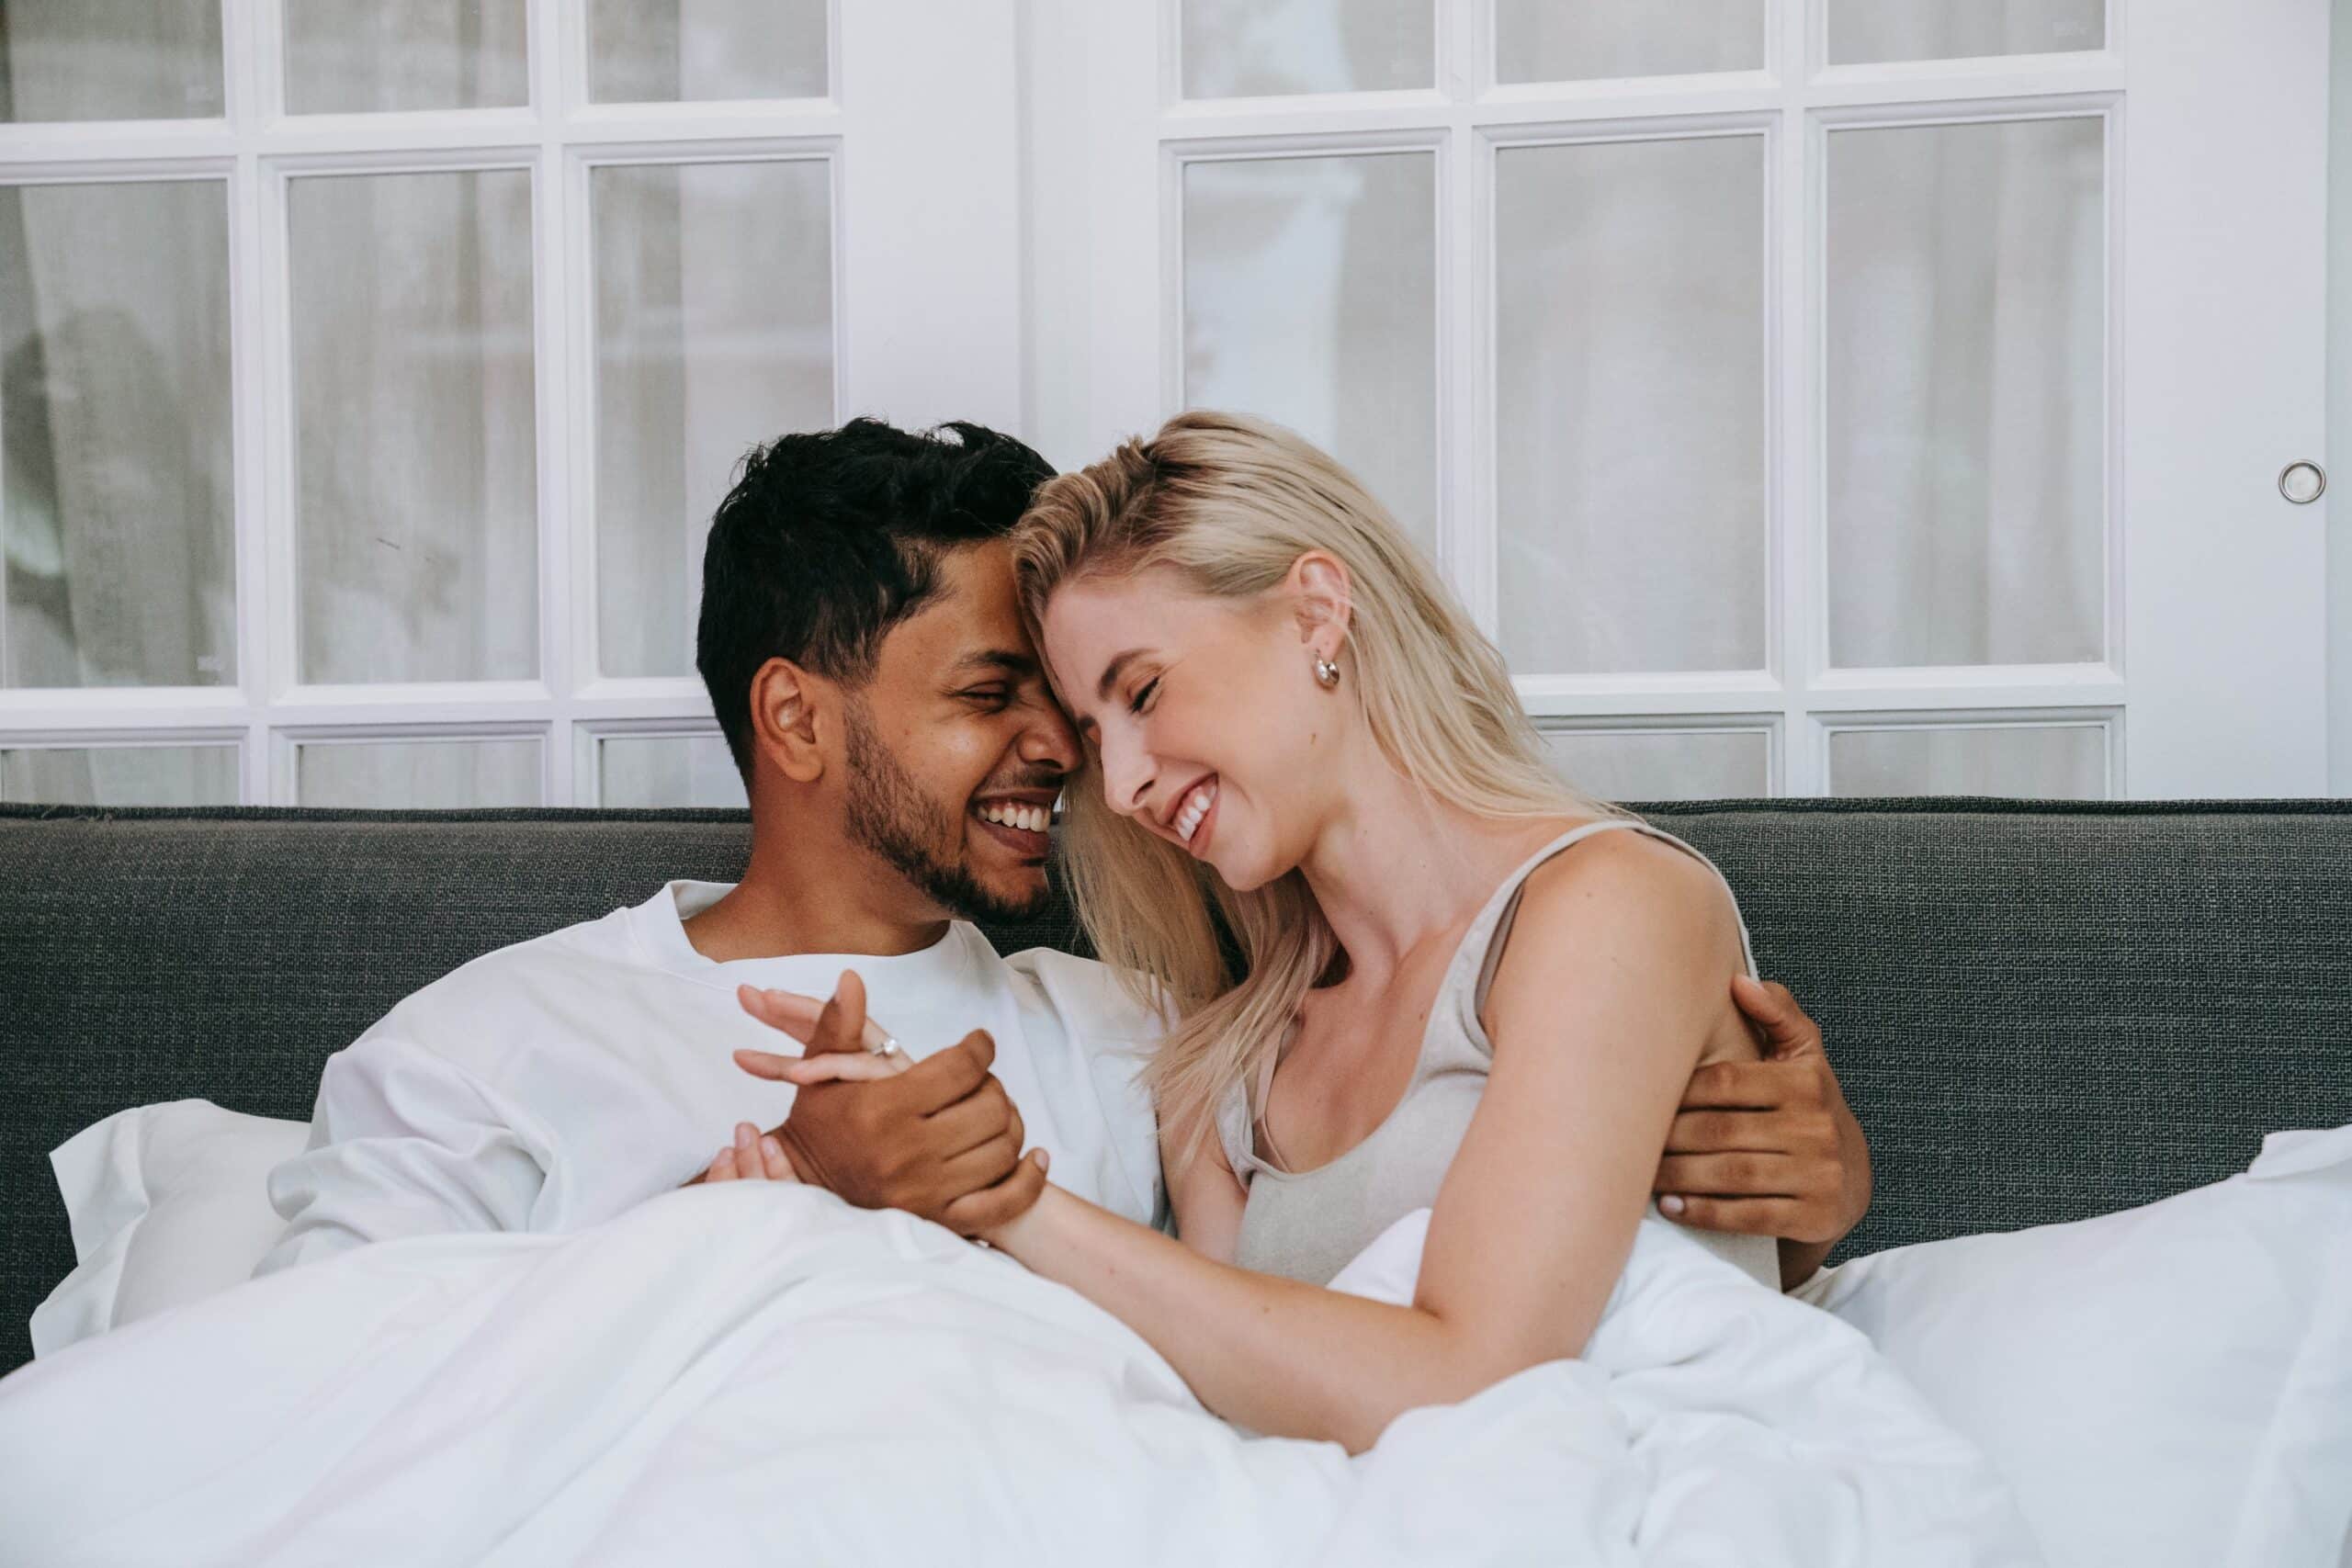 Navigating Intimate Connections Through Lovemaking